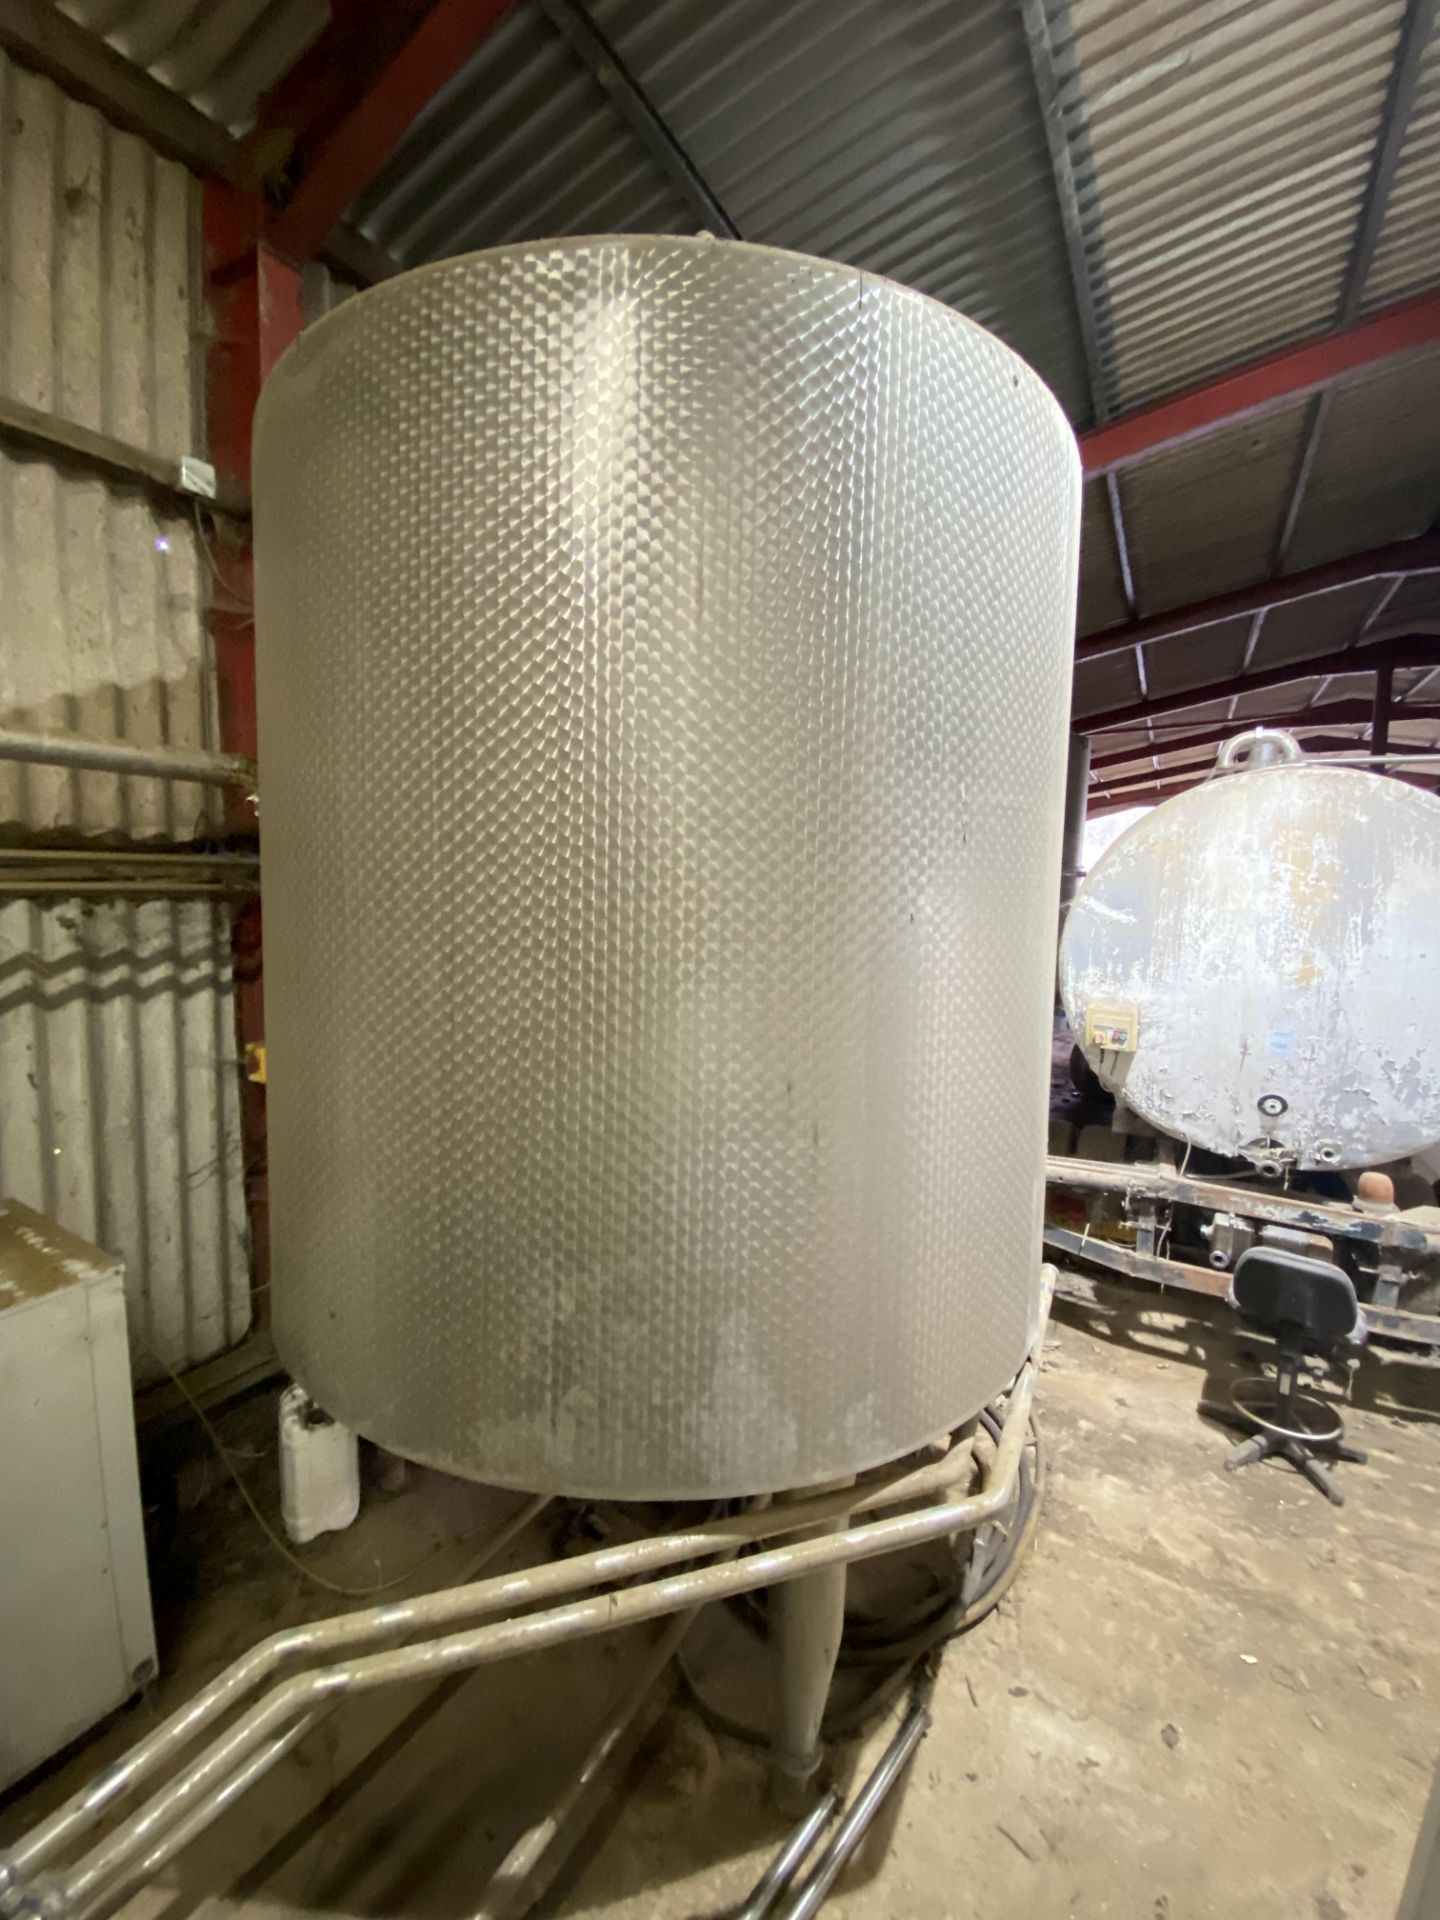 Pasilac SBQ VERTICAL STAINLESS STEEL MIXING VESSEL, code no. 733.16, serial no. 54.754/01.2, approx. - Image 2 of 4